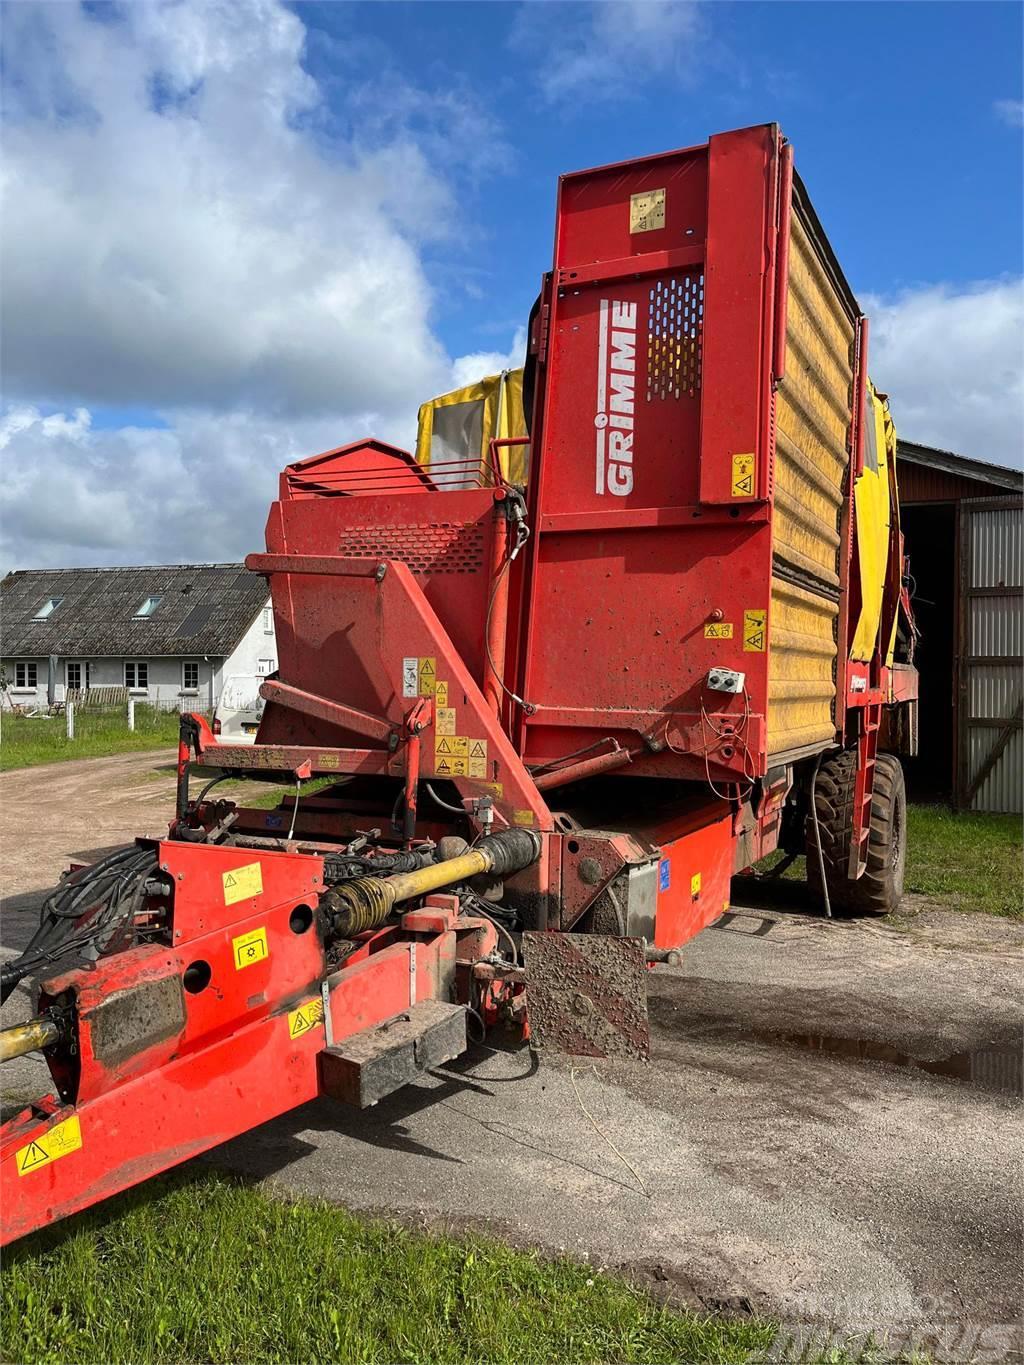 Grimme SE 170-60 Potato harvesters and diggers